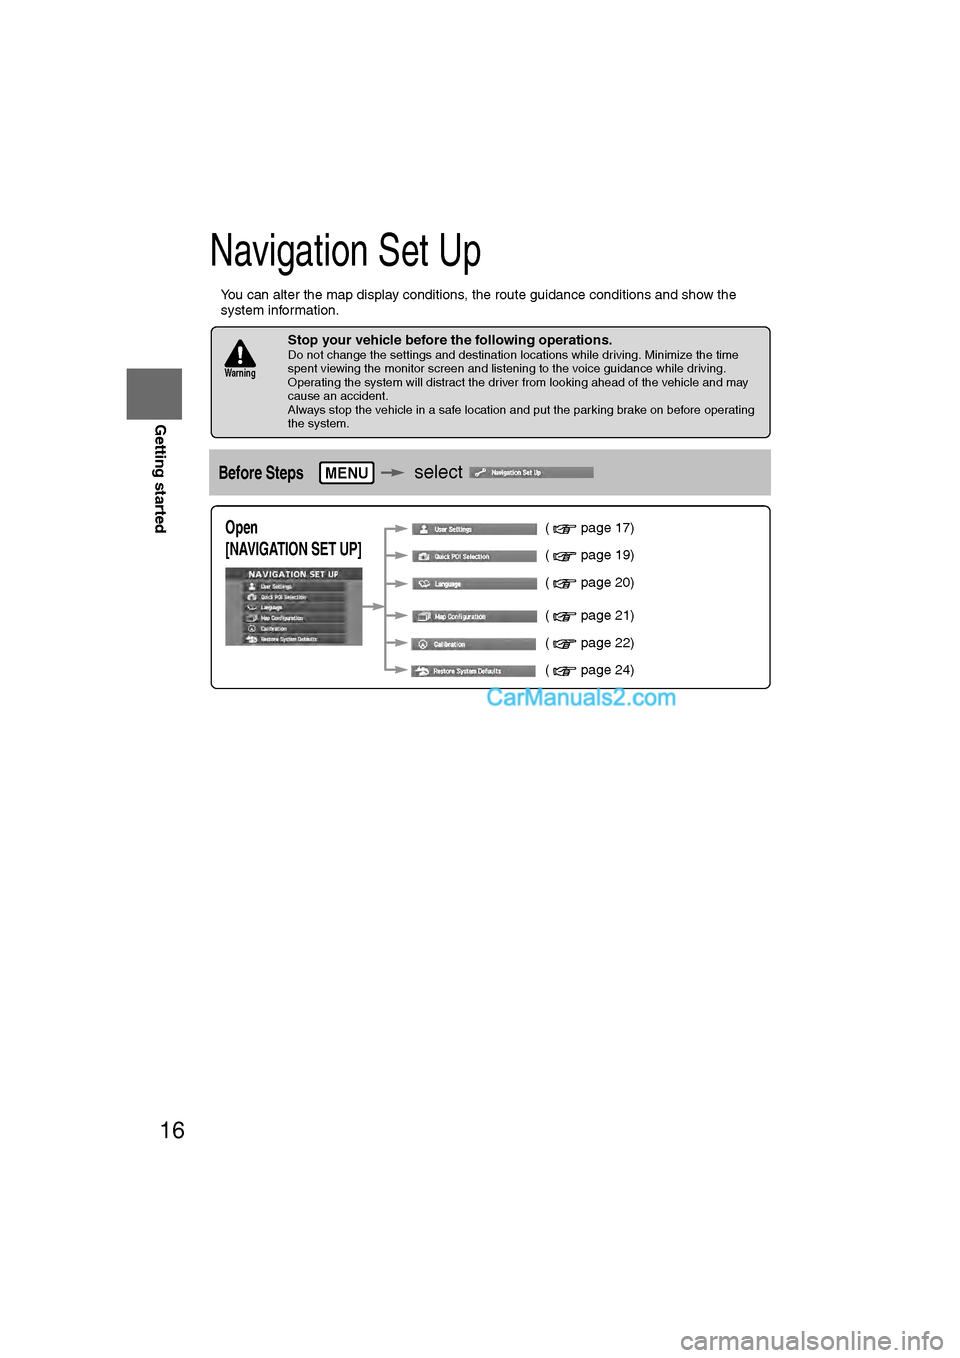 MAZDA MODEL CX-9 2008  Navigation Manual (in English) 16
RoutingAddress 
Book
Getting started
Navigation Set Up
l
You can alter the map display conditions, the route guidance conditions and show the 
system information.
nStop your vehicle before the foll